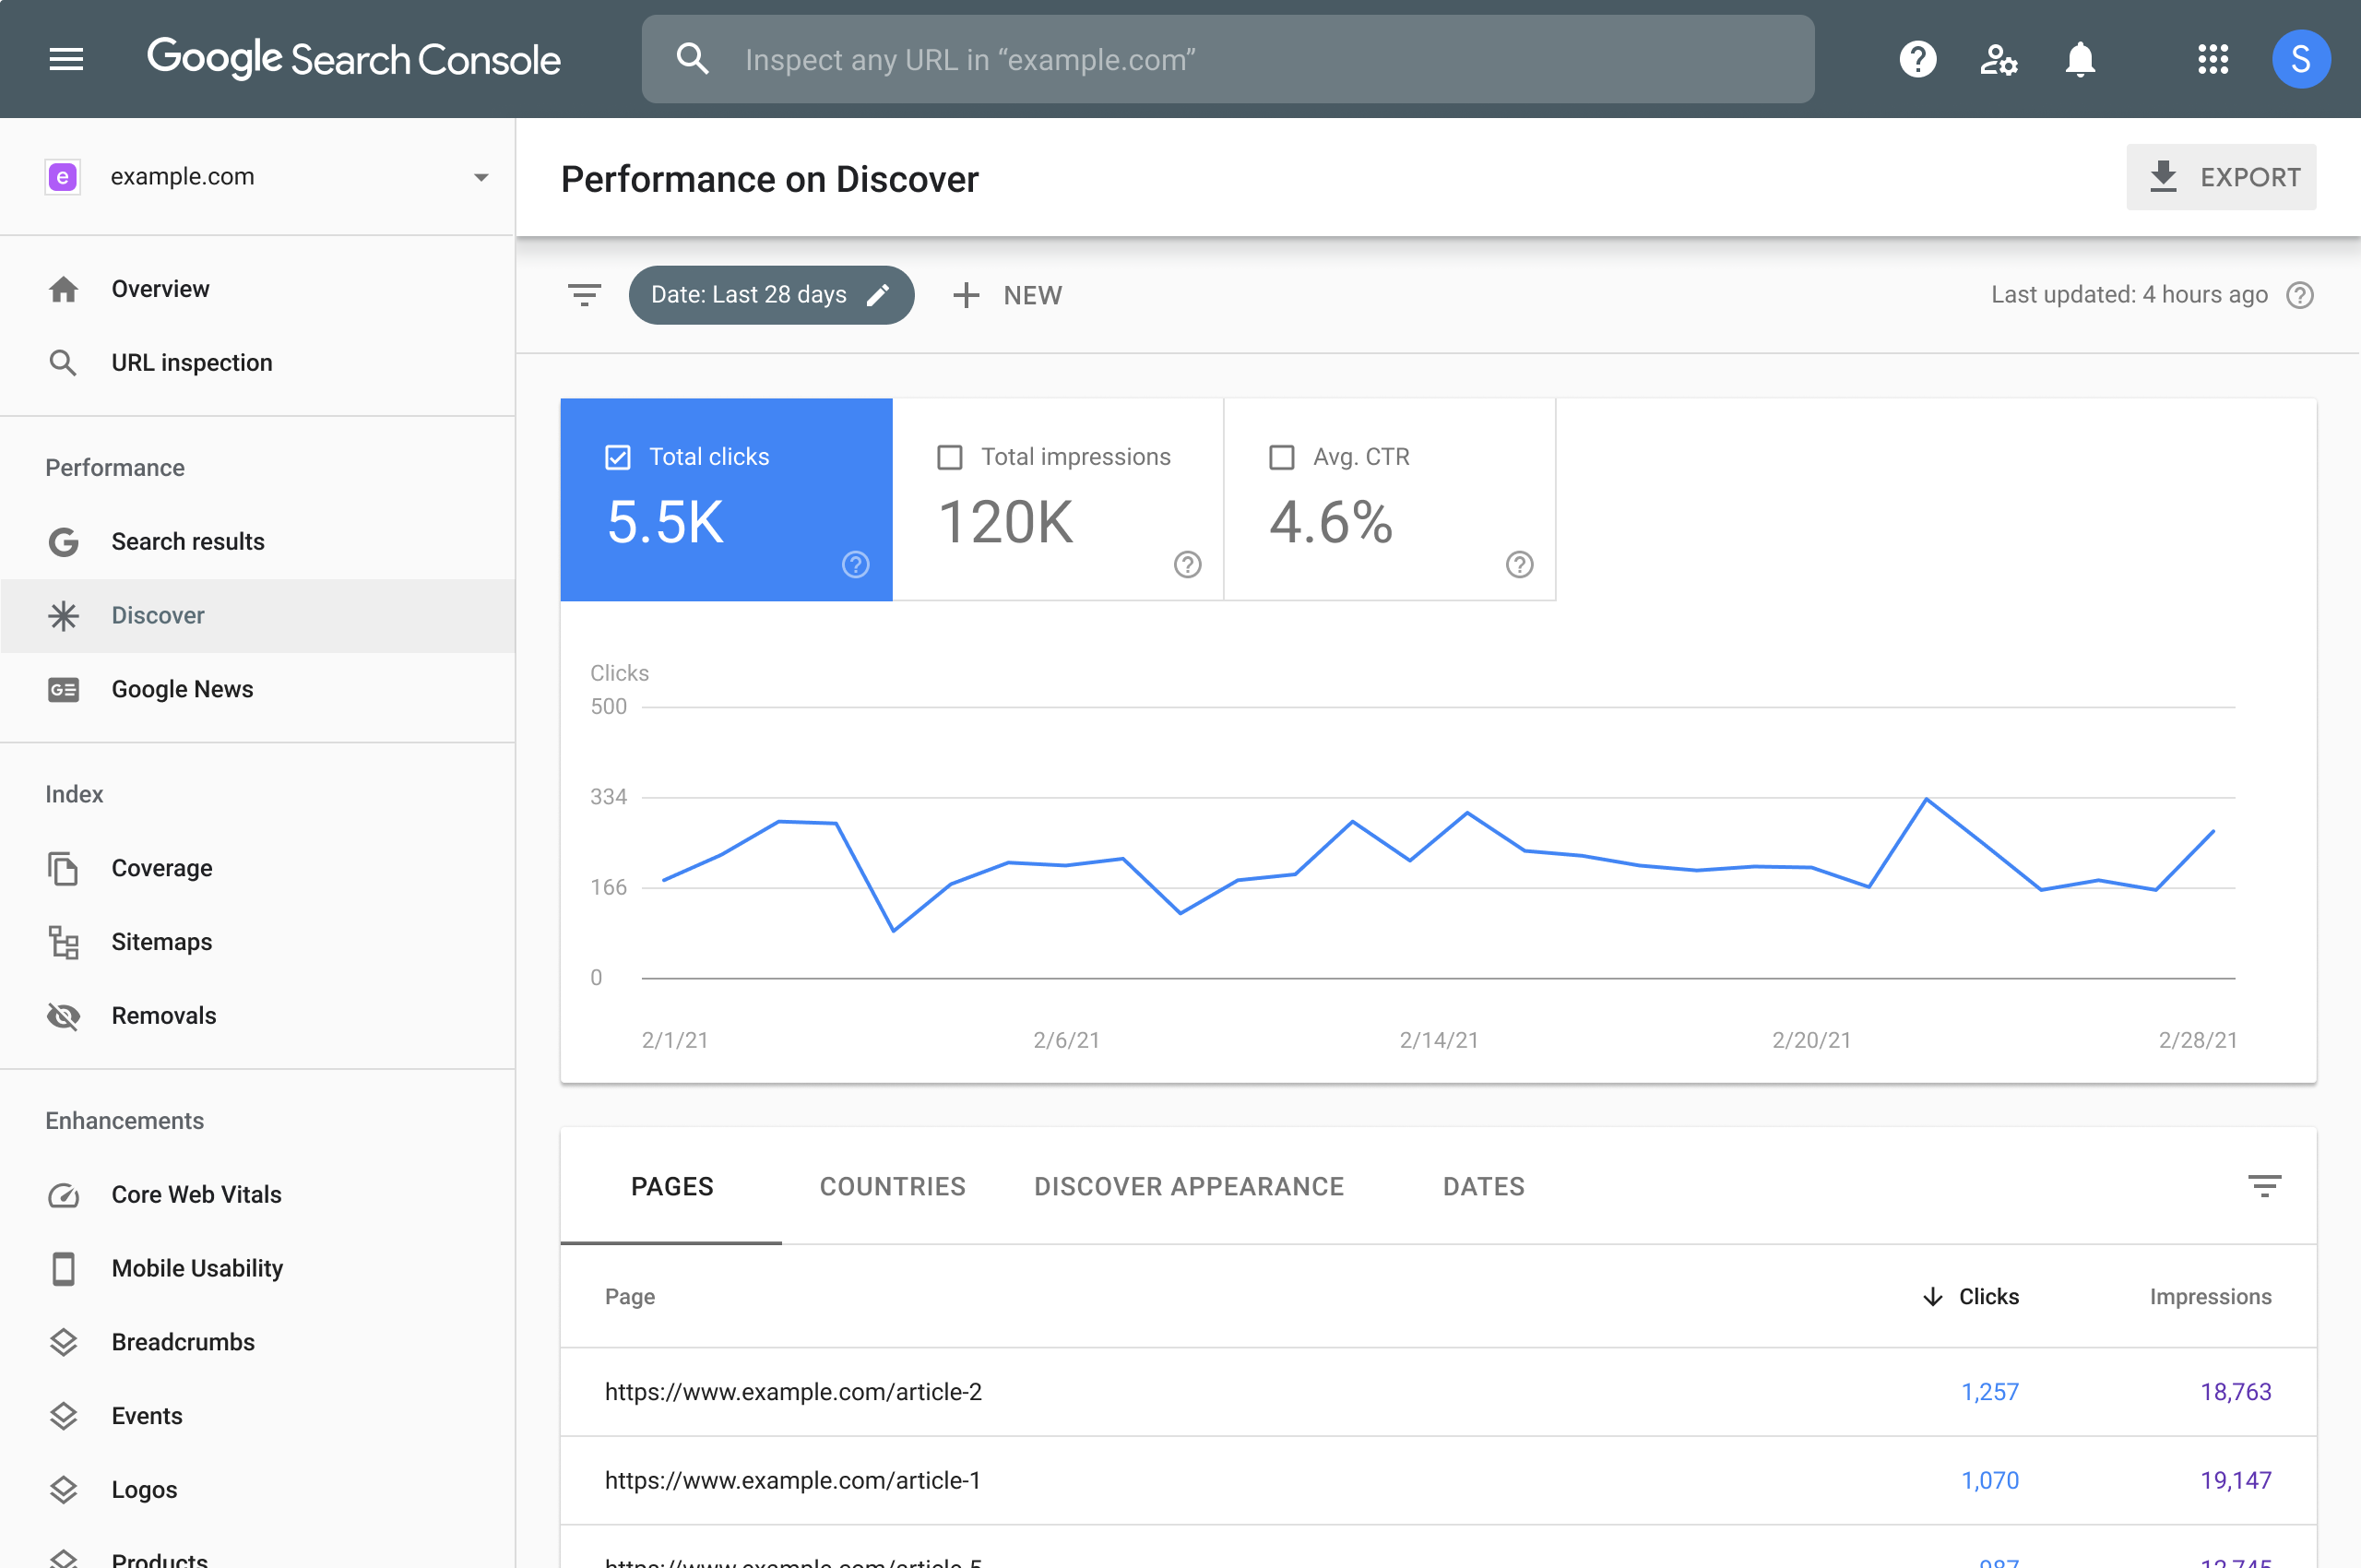 Google Search Console Updates Discover Report With Chrome Data